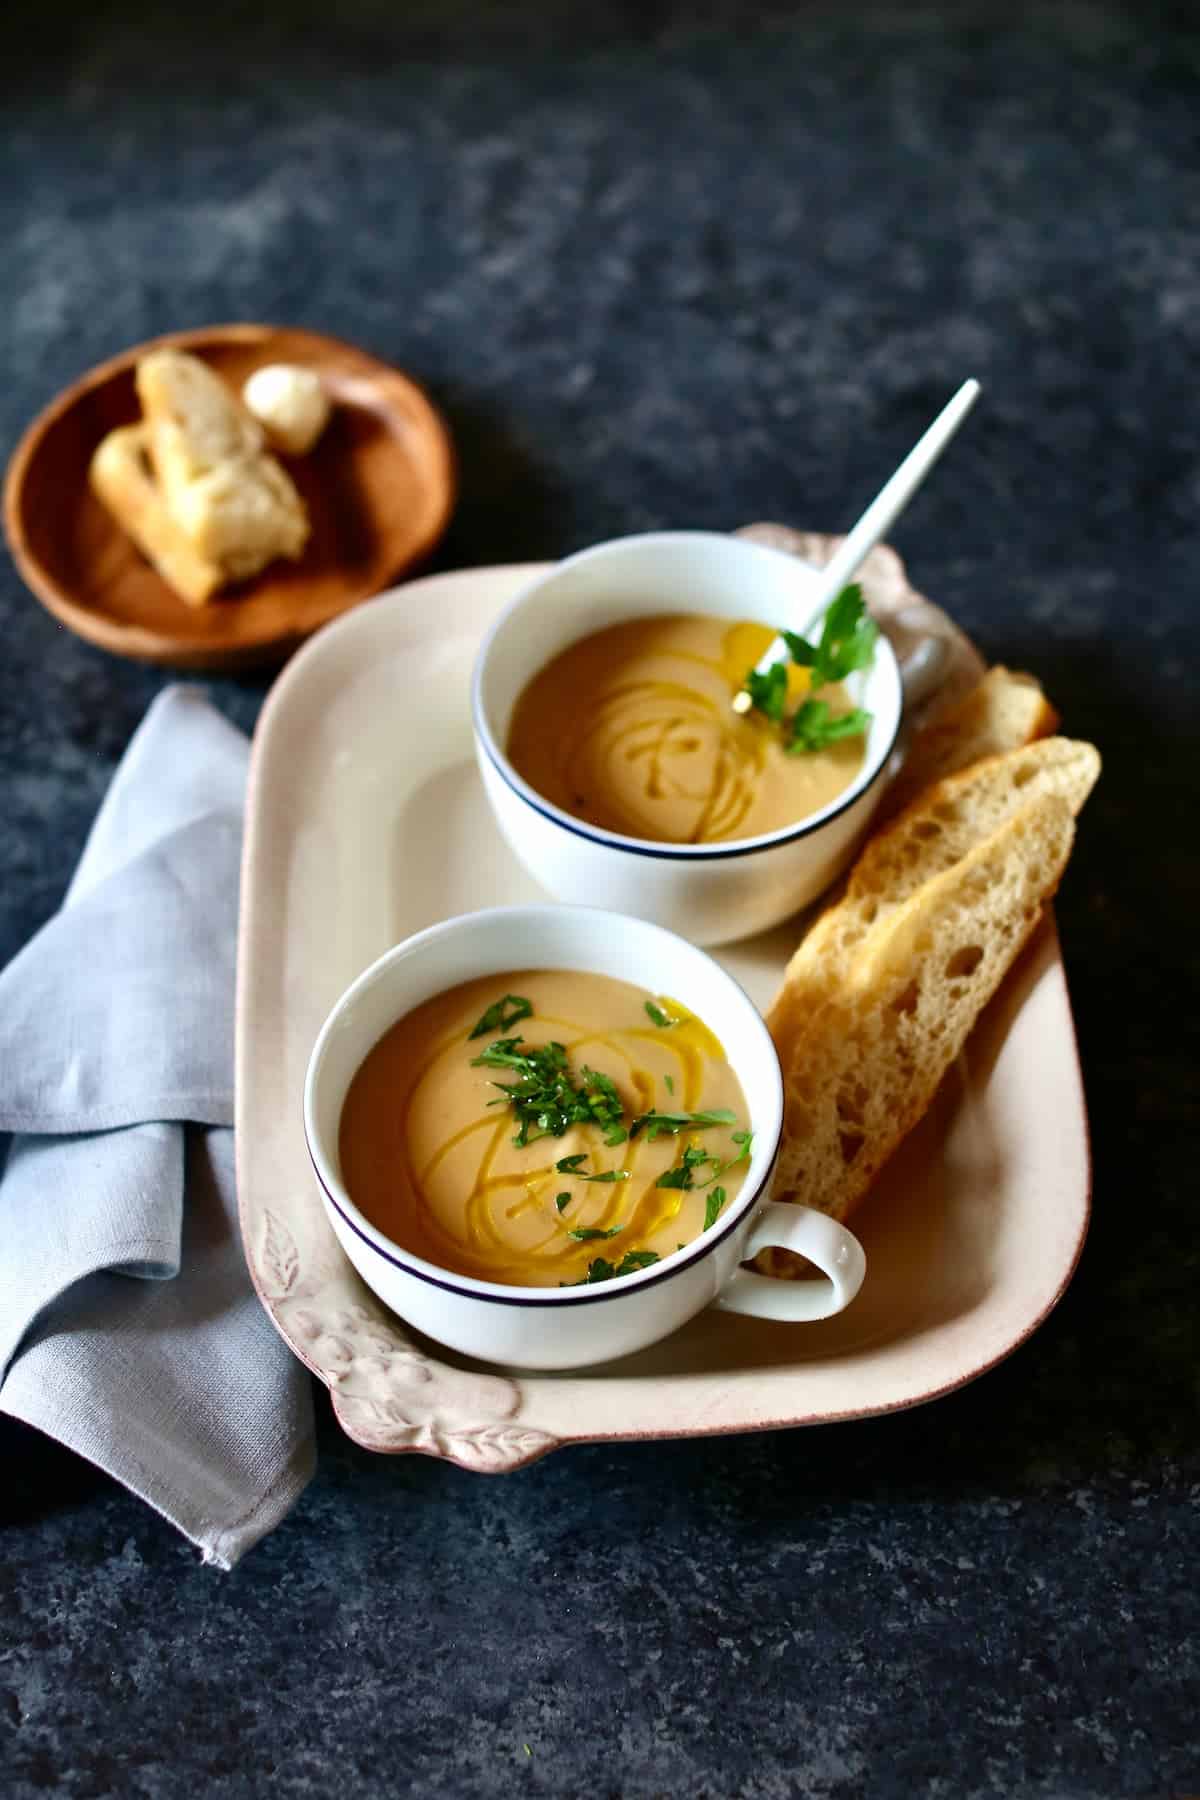 a photo of two cups of soup on a tray with a plate of bread.